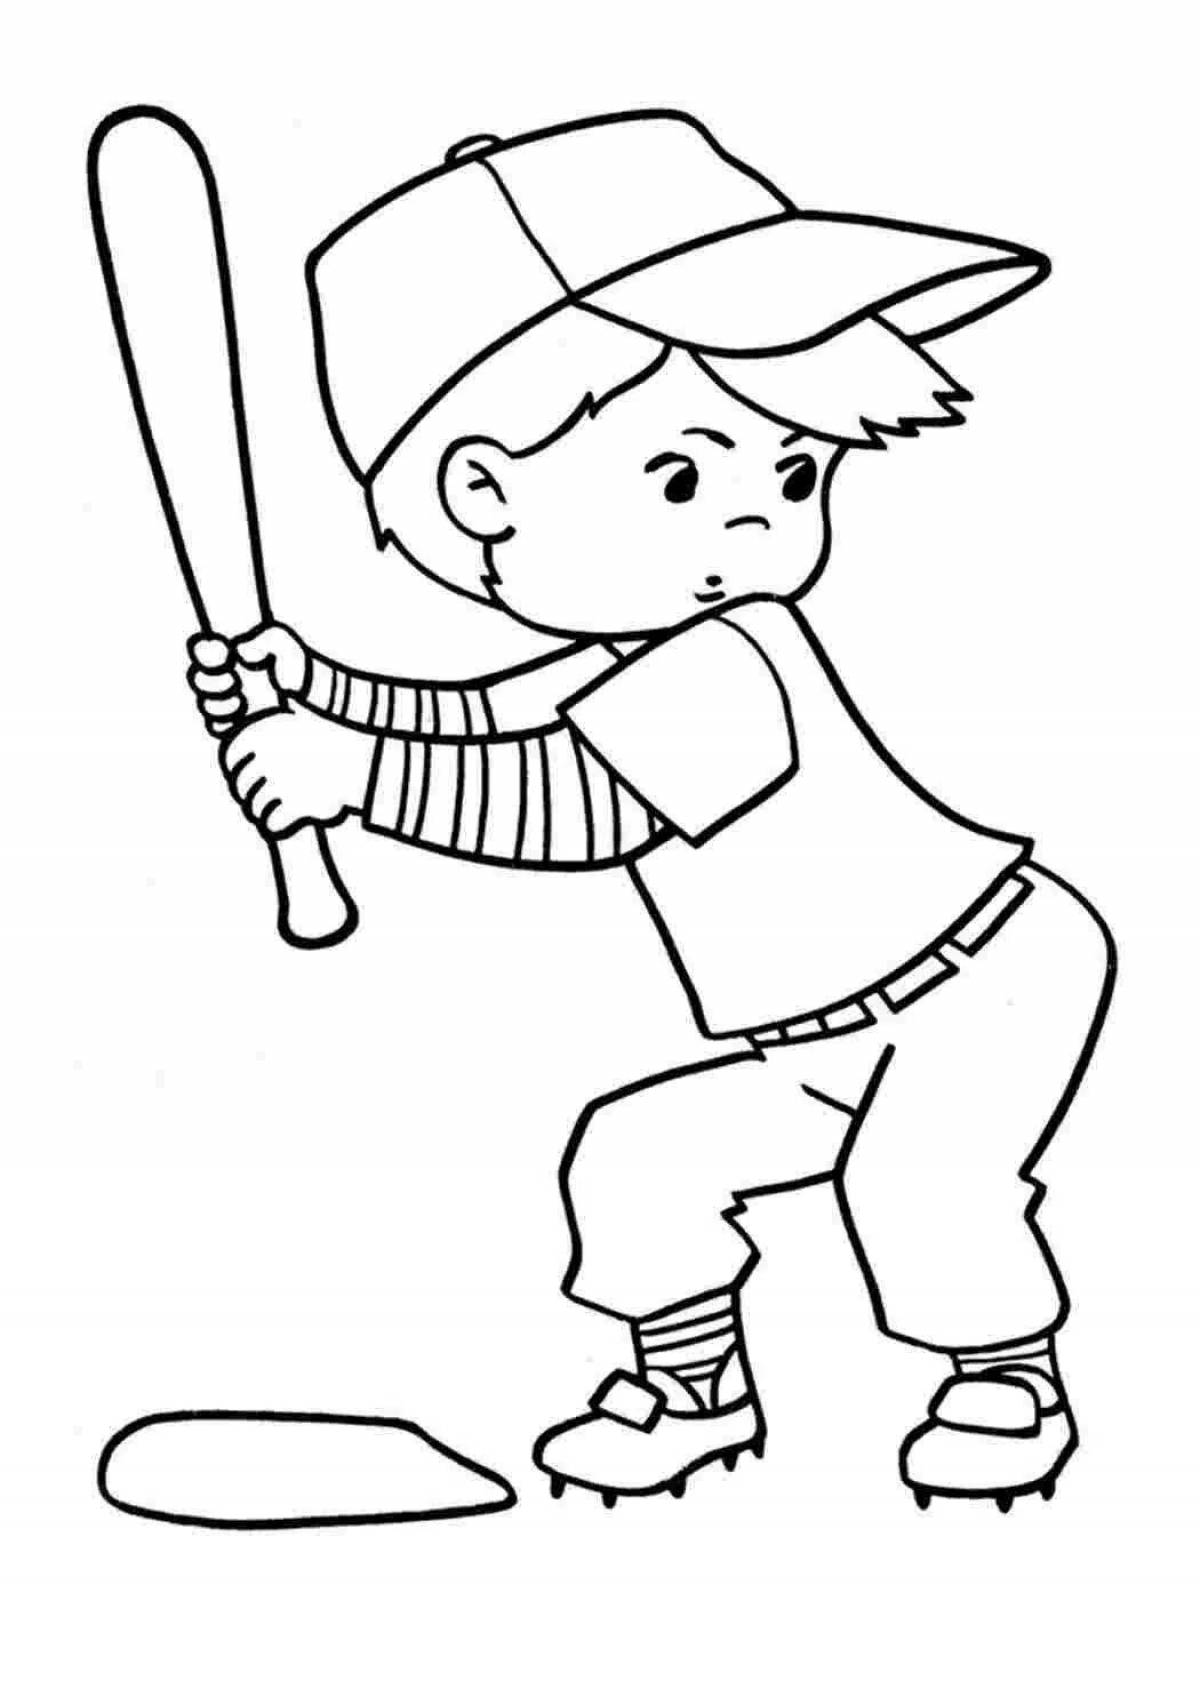 Fabulous sports coloring pages for kids